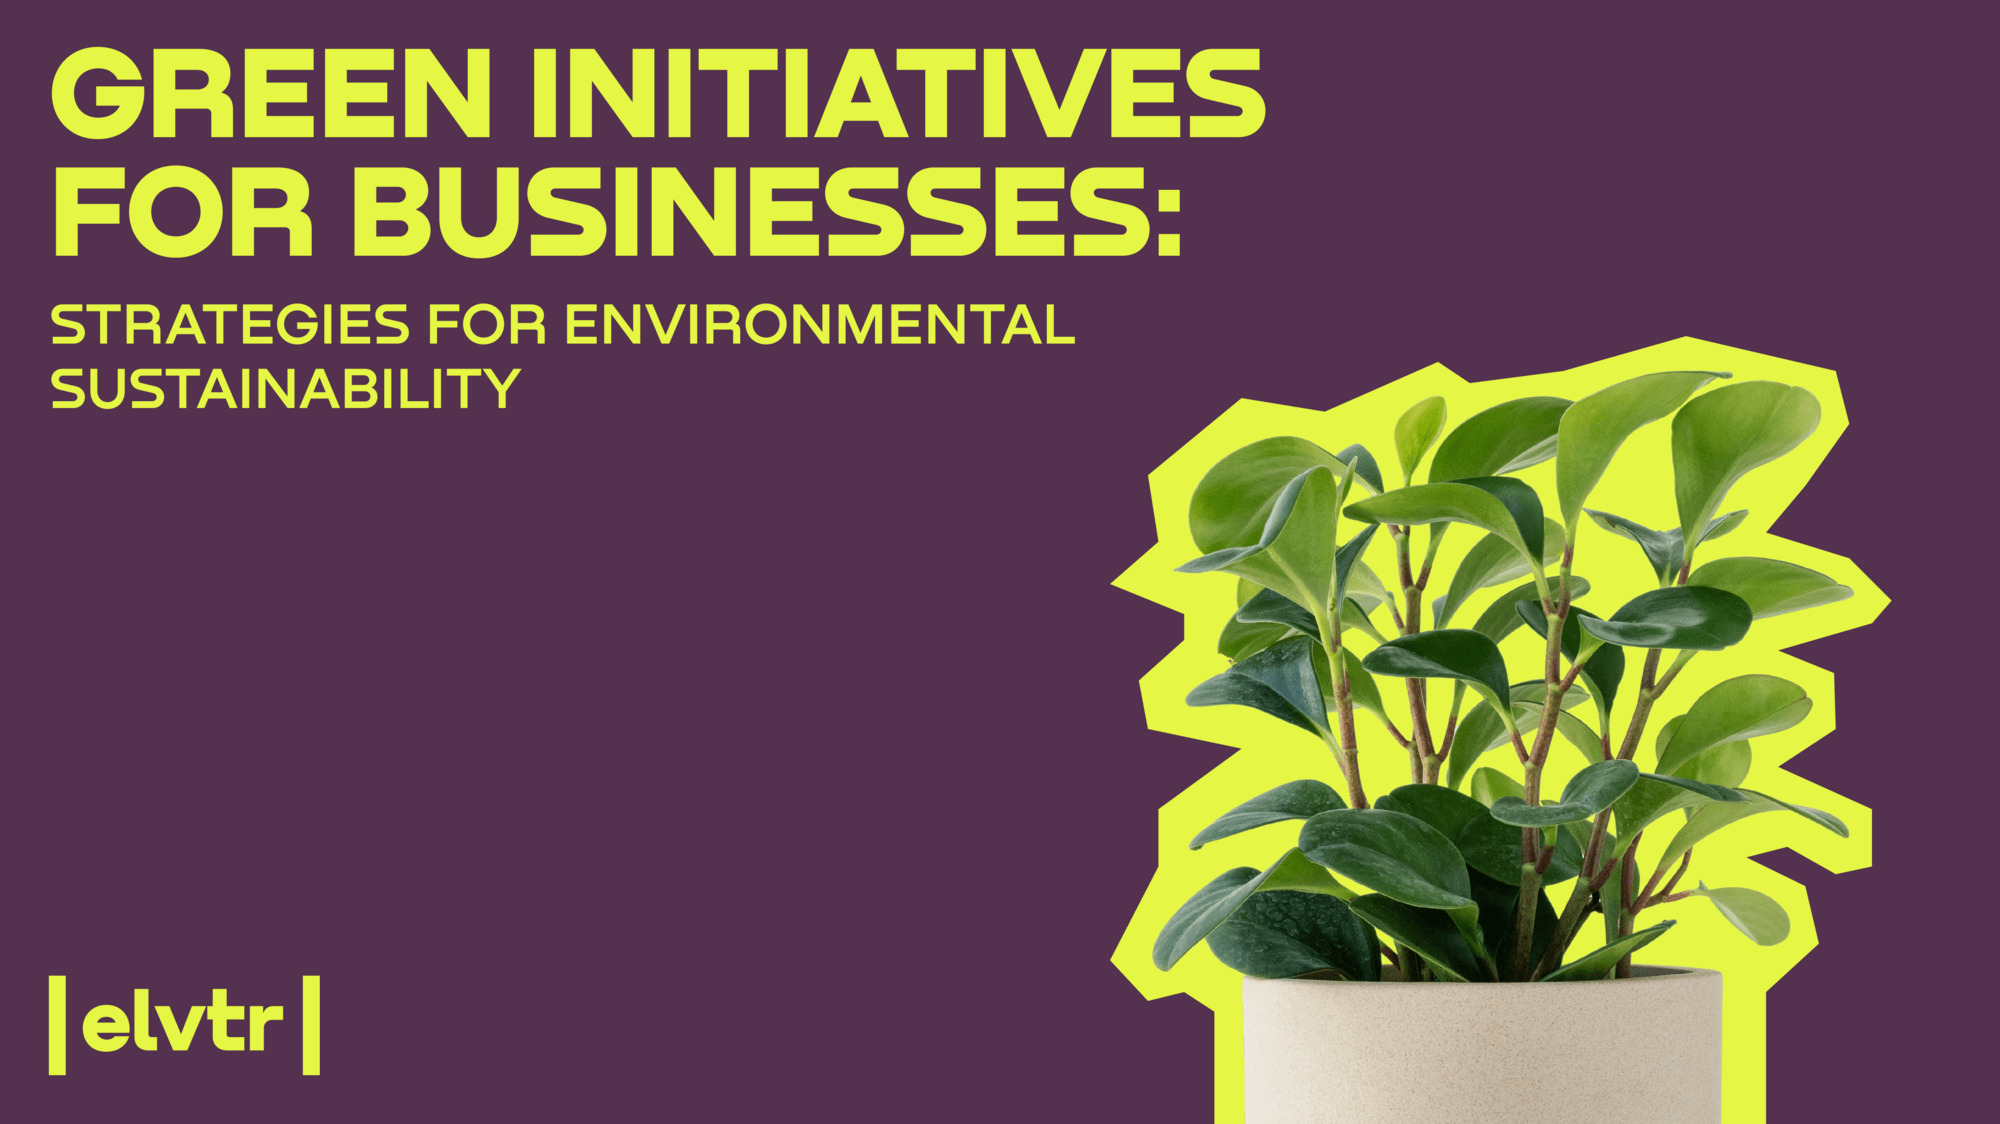 Green Initiatives for Businesses: Strategies for Environmental Sustainability image